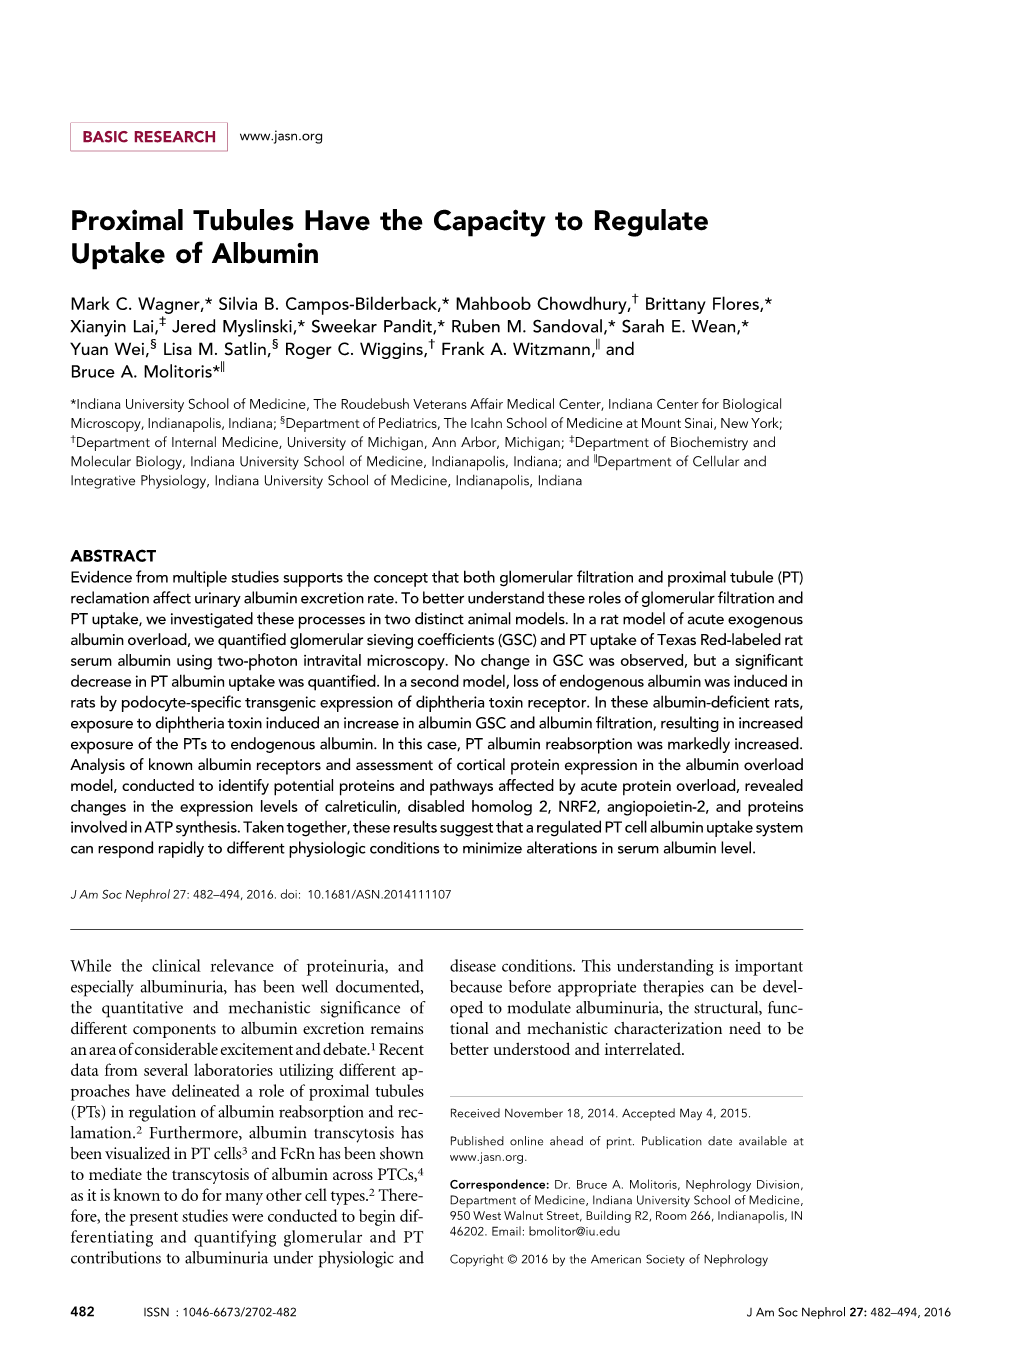 Proximal Tubules Have the Capacity to Regulate Uptake of Albumin